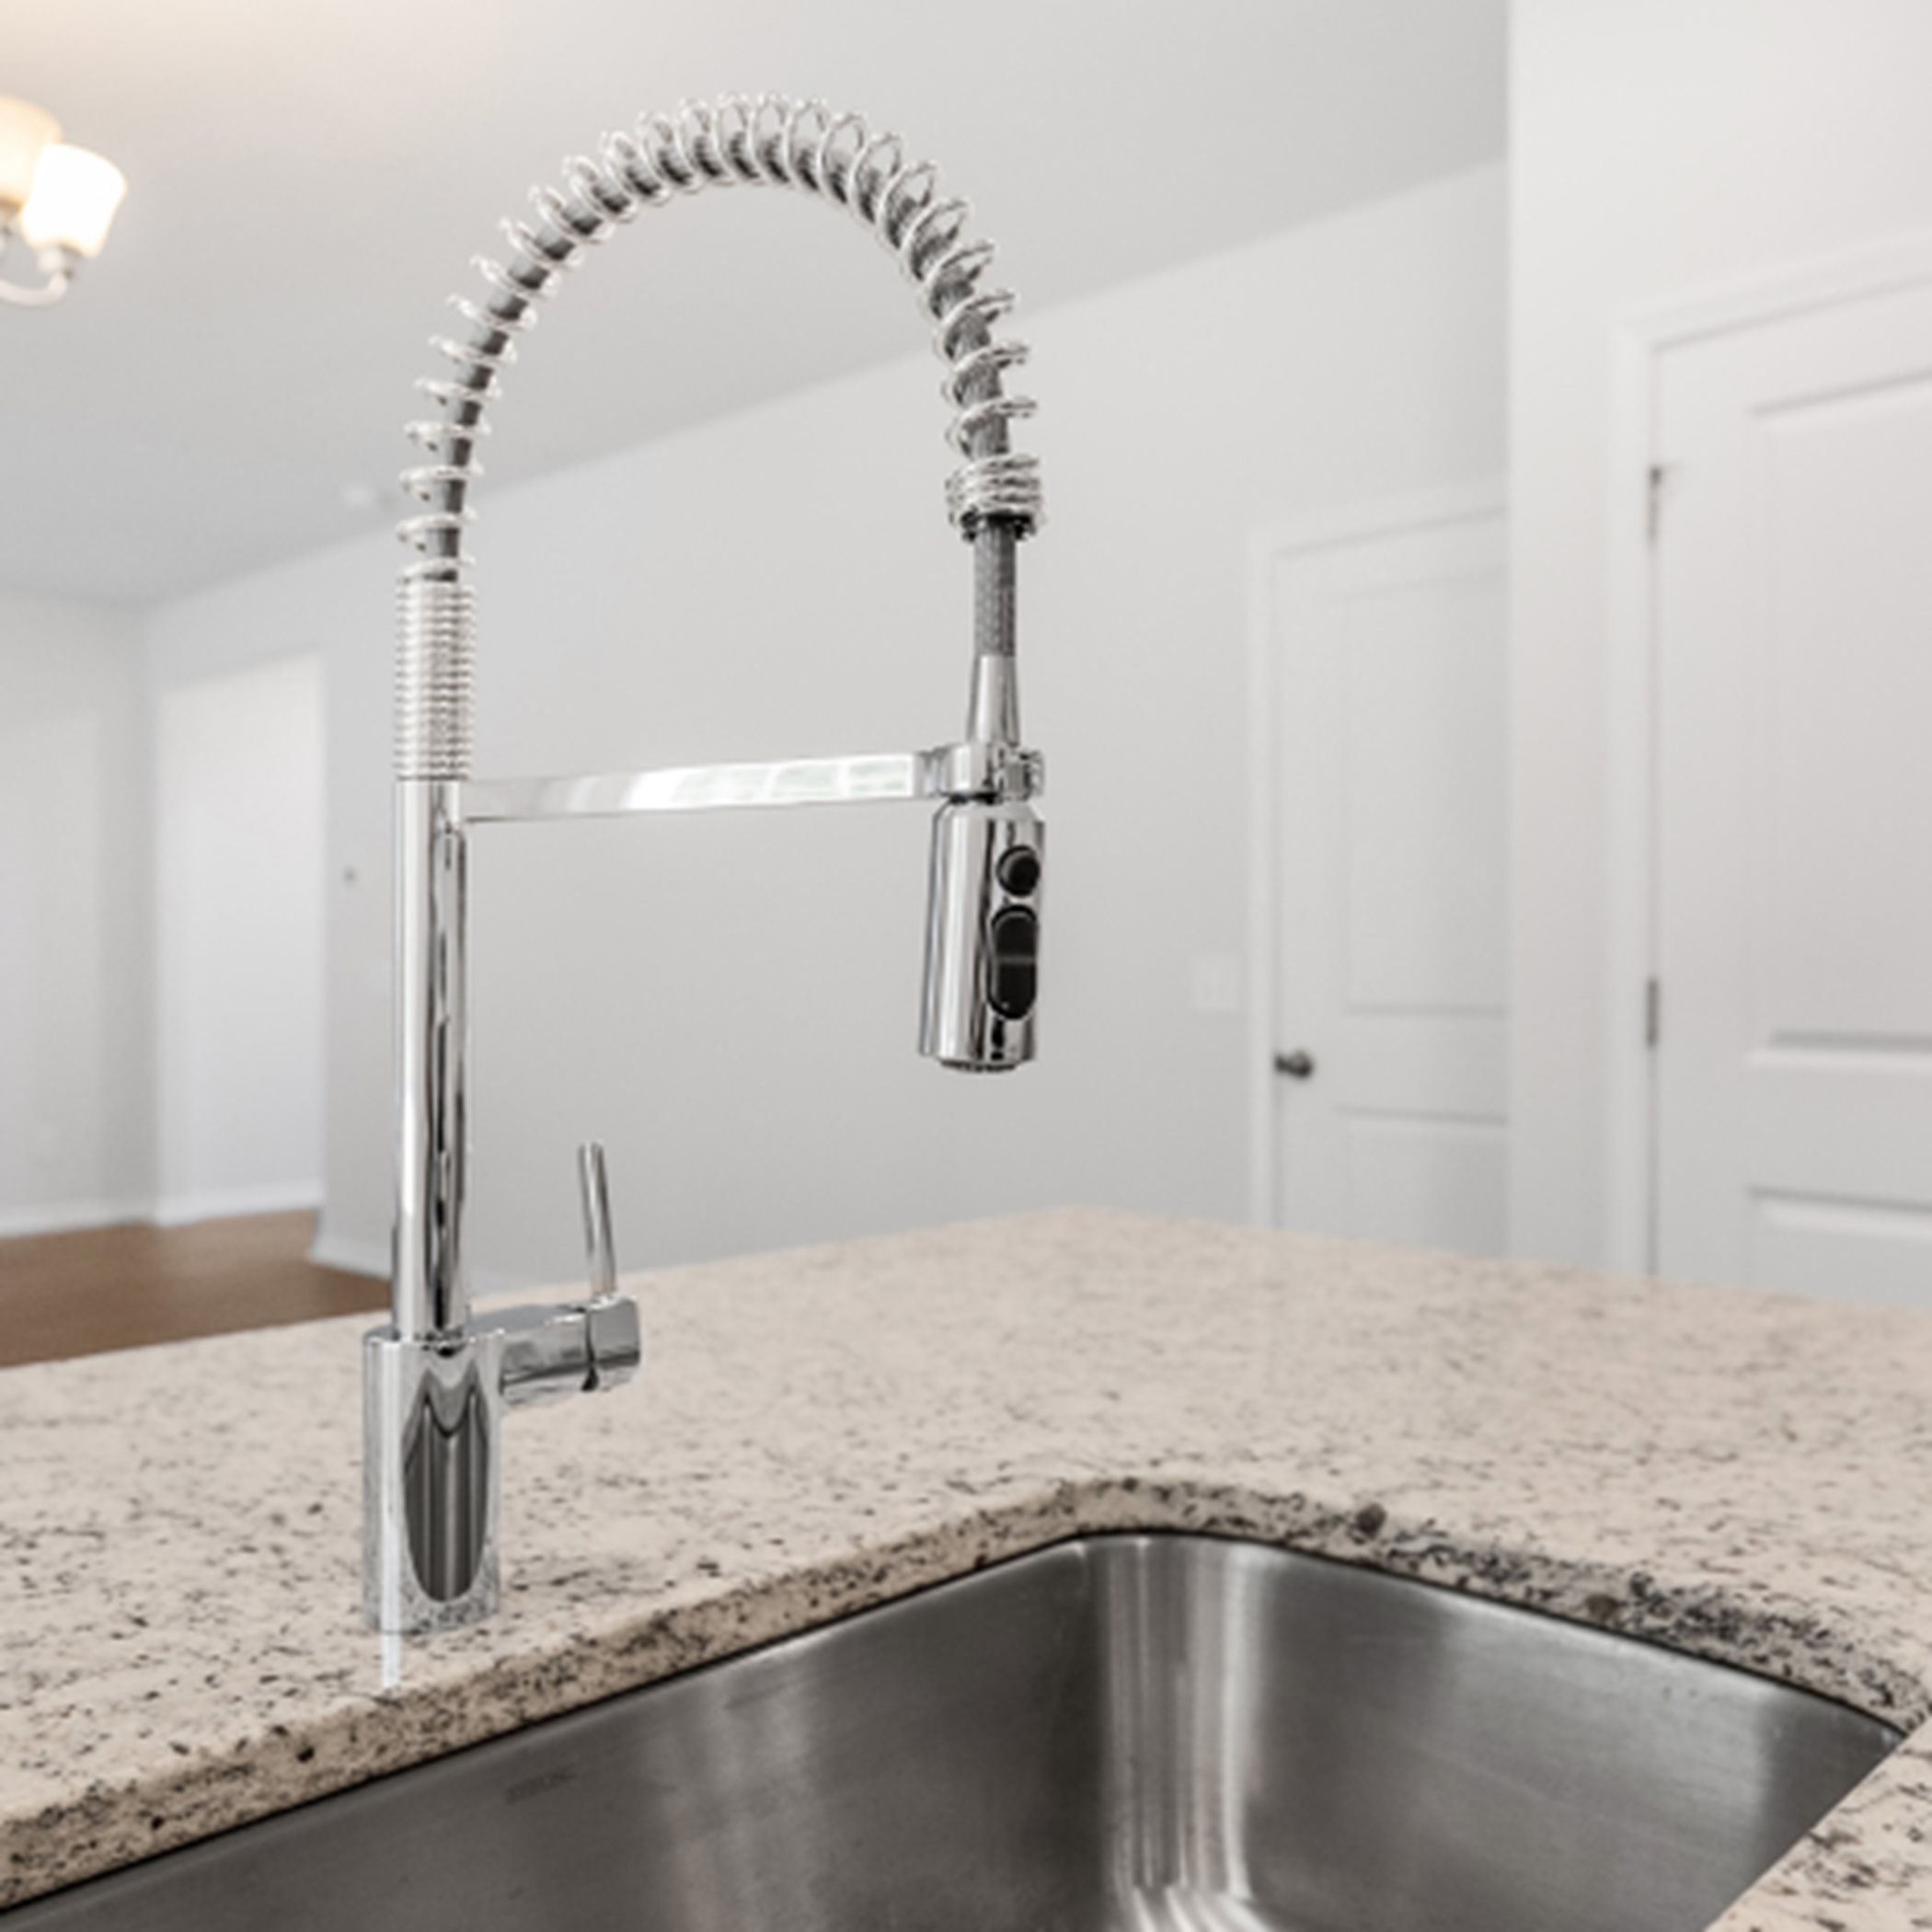 Sweetgrass faucet